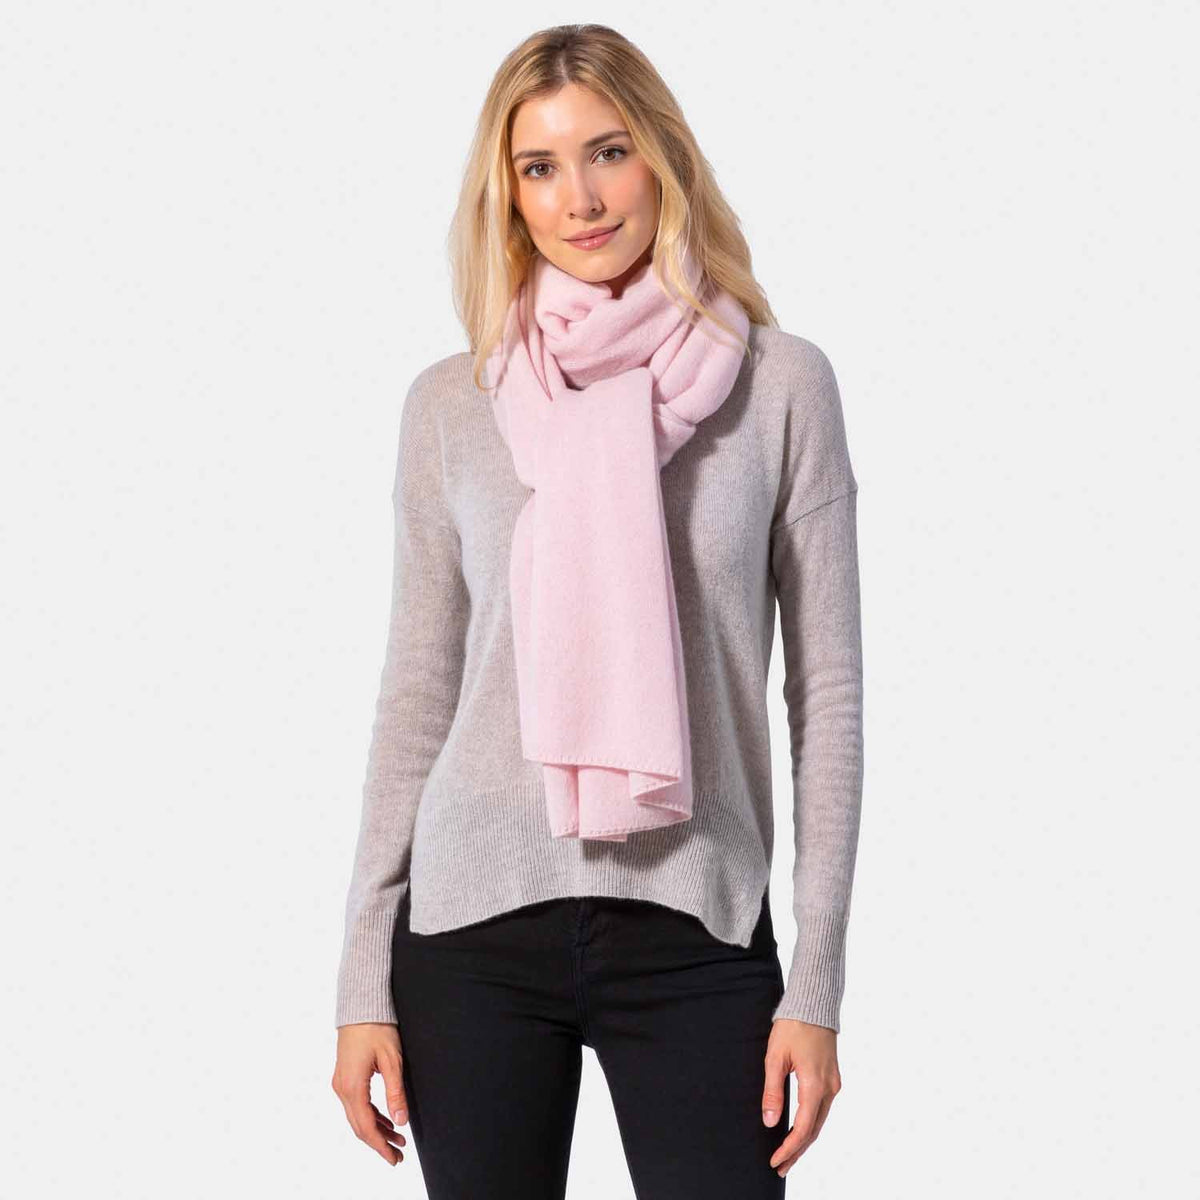 Picture of a woman wearing a light pink cashmere jersey knitted oversize scarf or travel wrap.